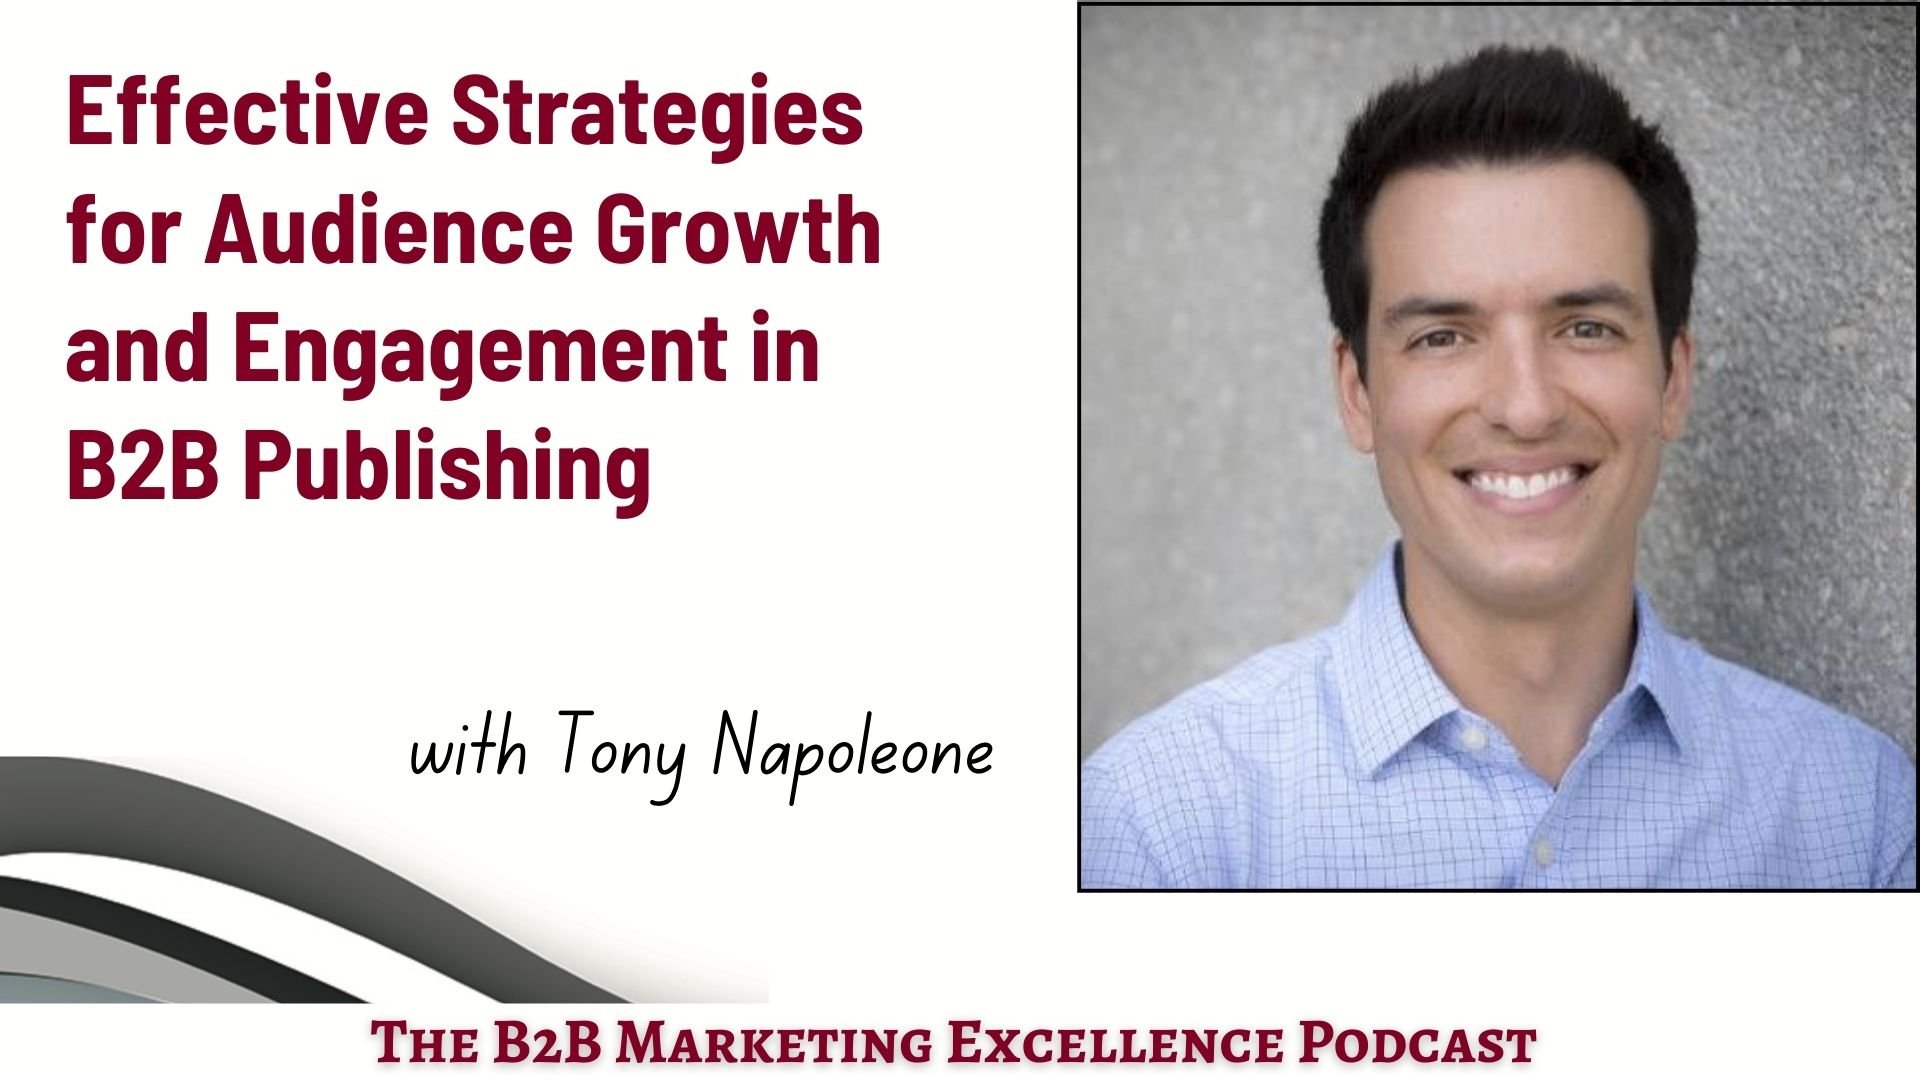 Effective Strategies for Audience Growth and Engagement in B2B Publishing